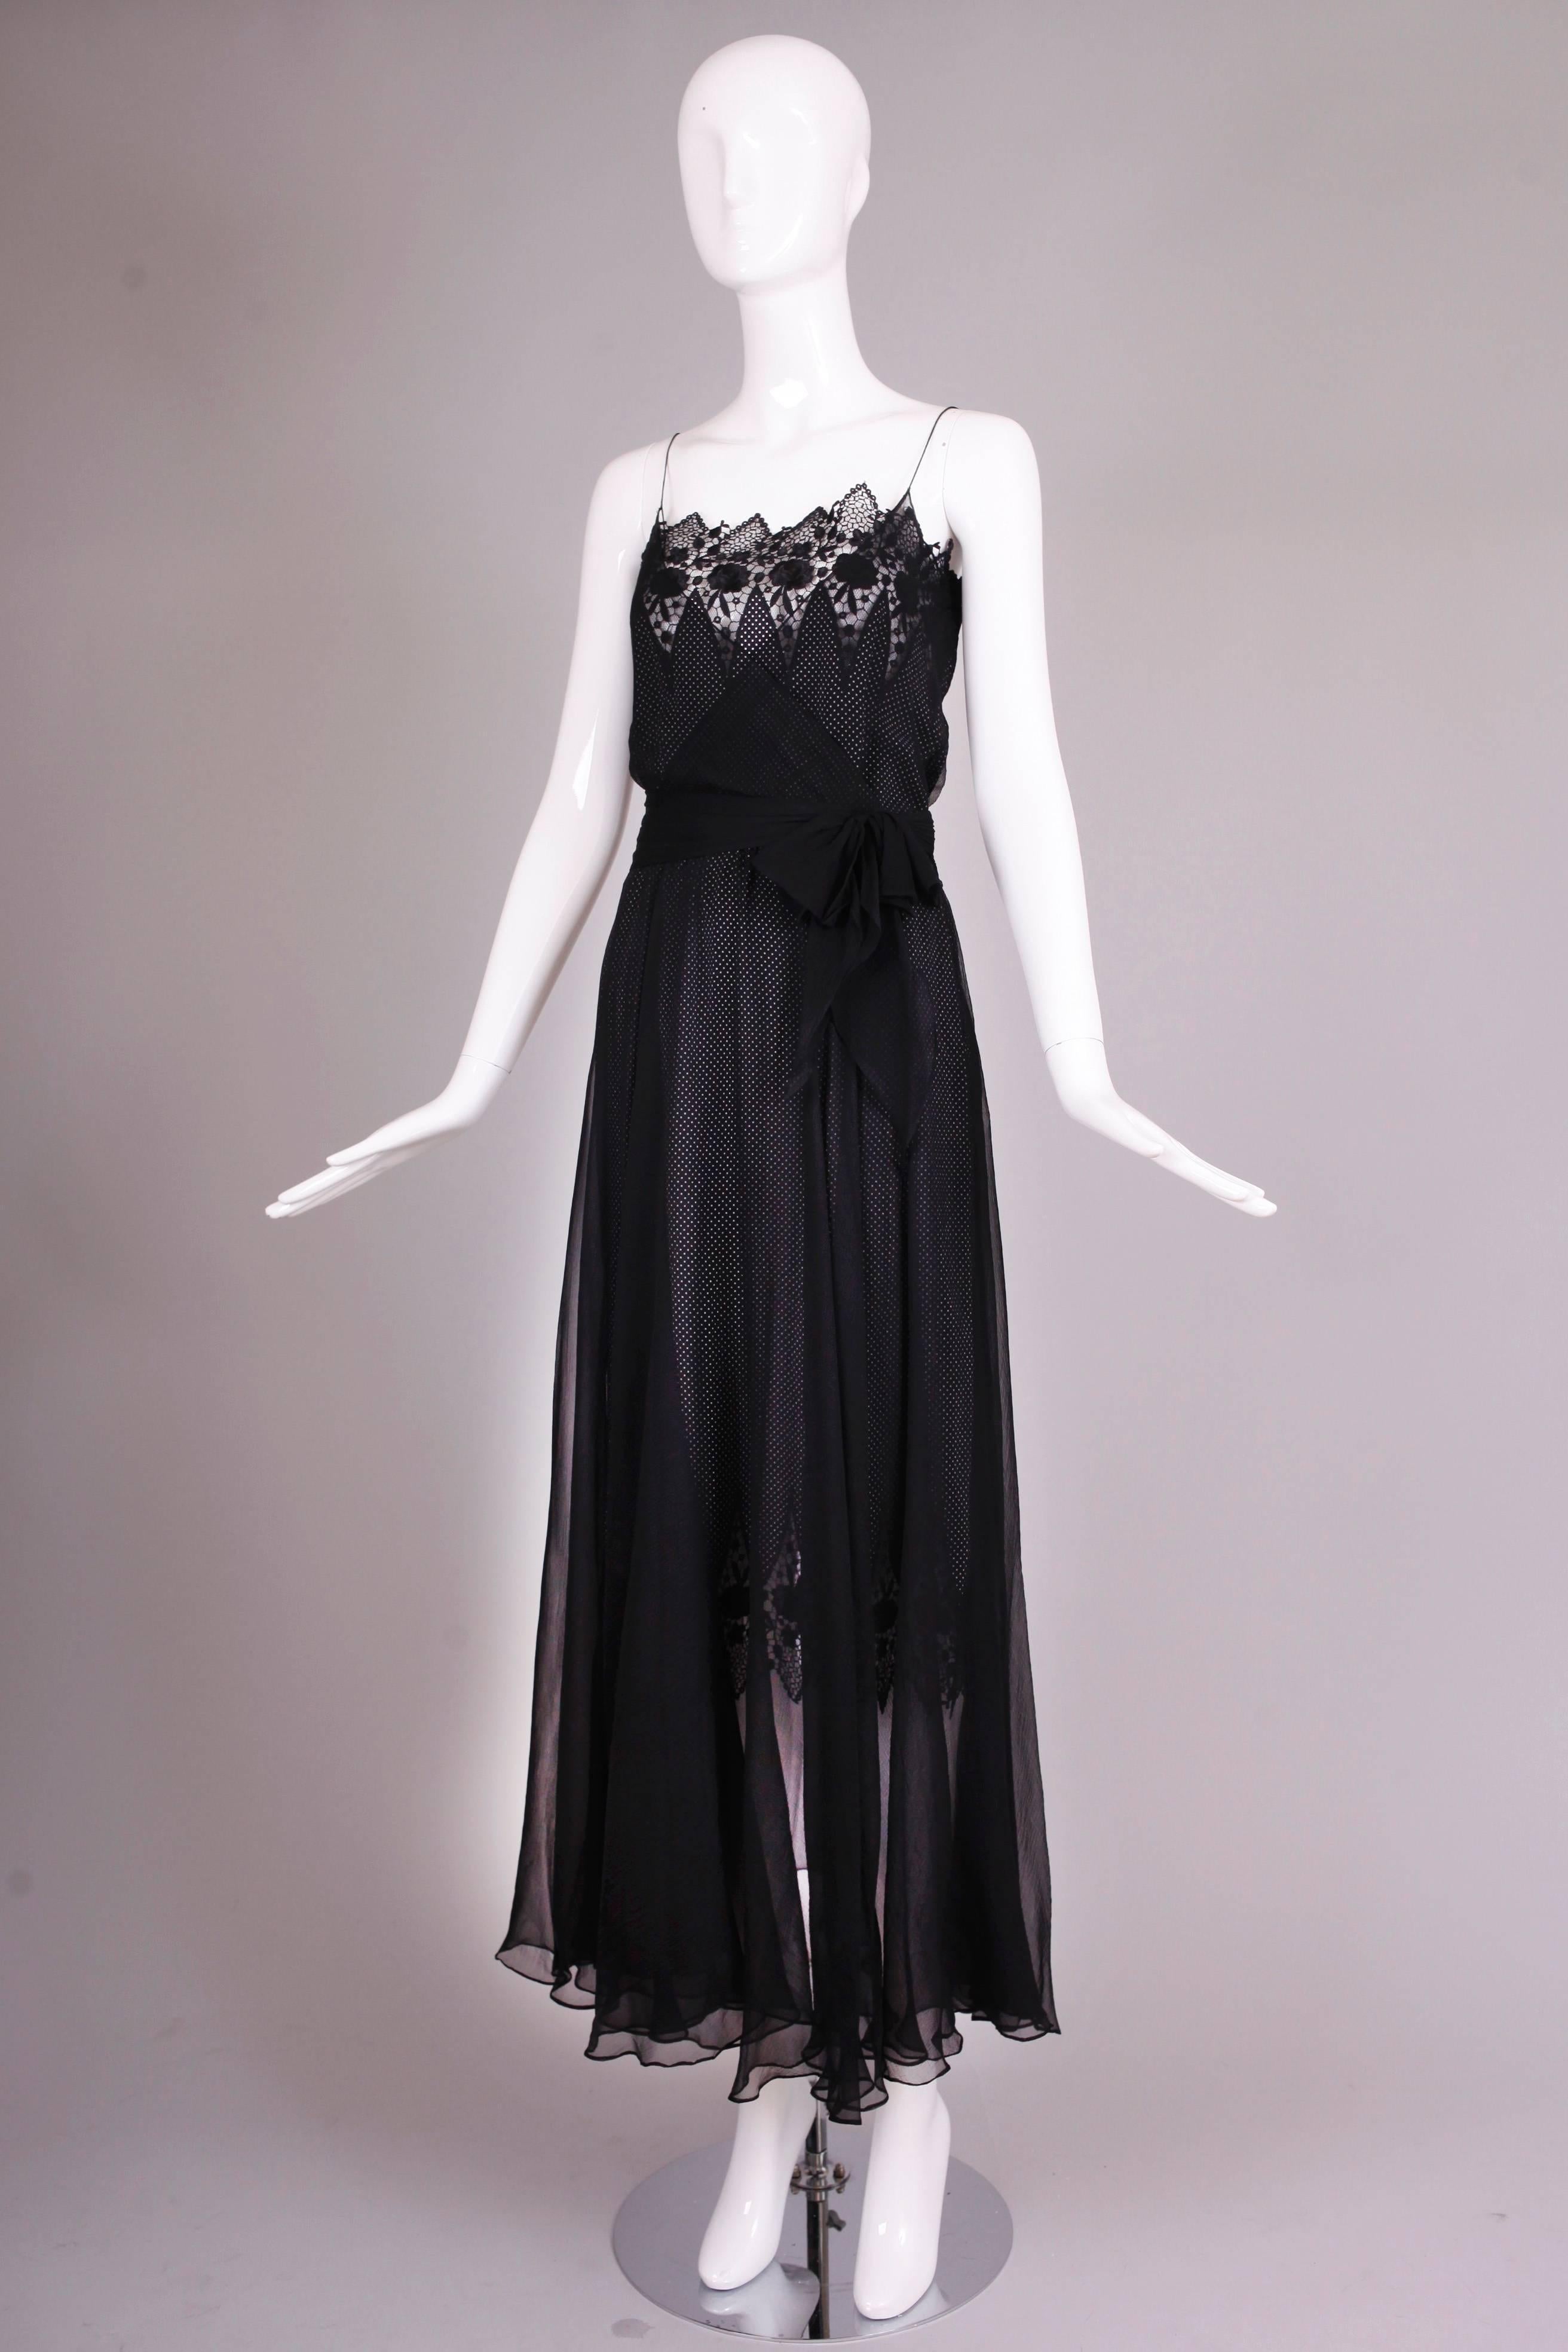 Black Nina Ricci by Gerard Pipart Haute Couture Silk Evening Gown w/Lace Detail ca1980